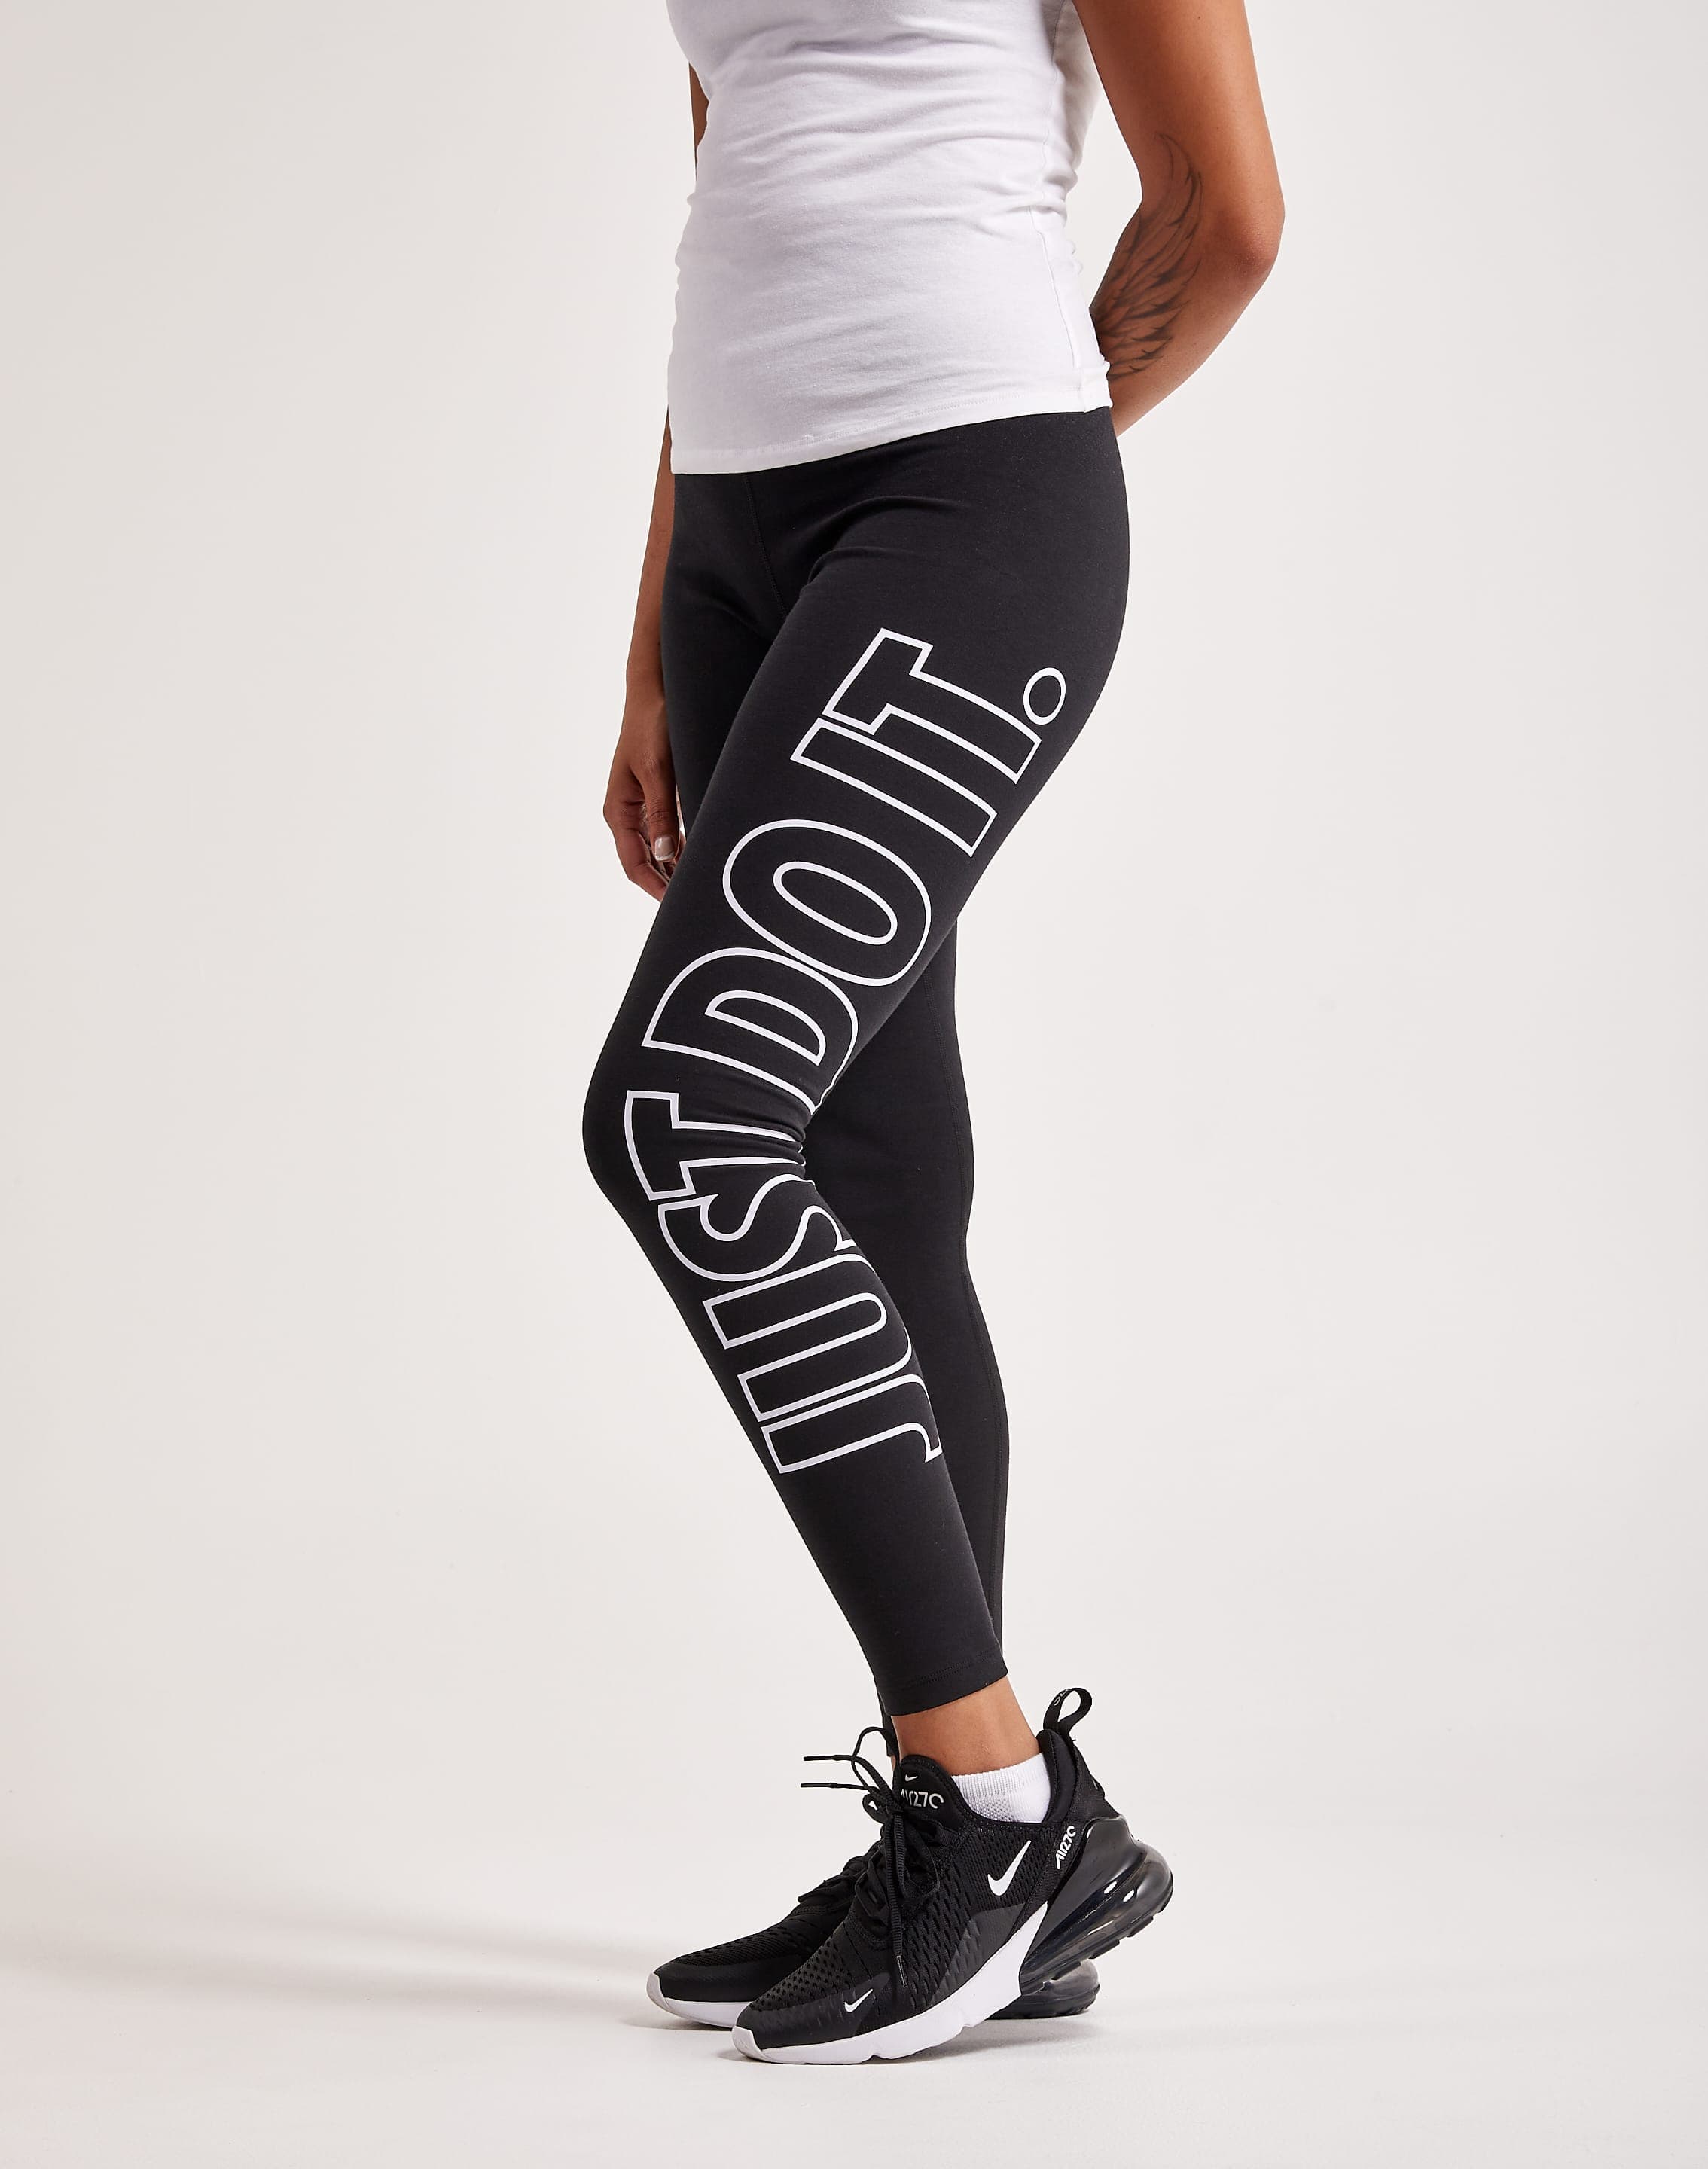 Titolo  Shop Wmns Nike Sportswear High-Waisted Leggings here at